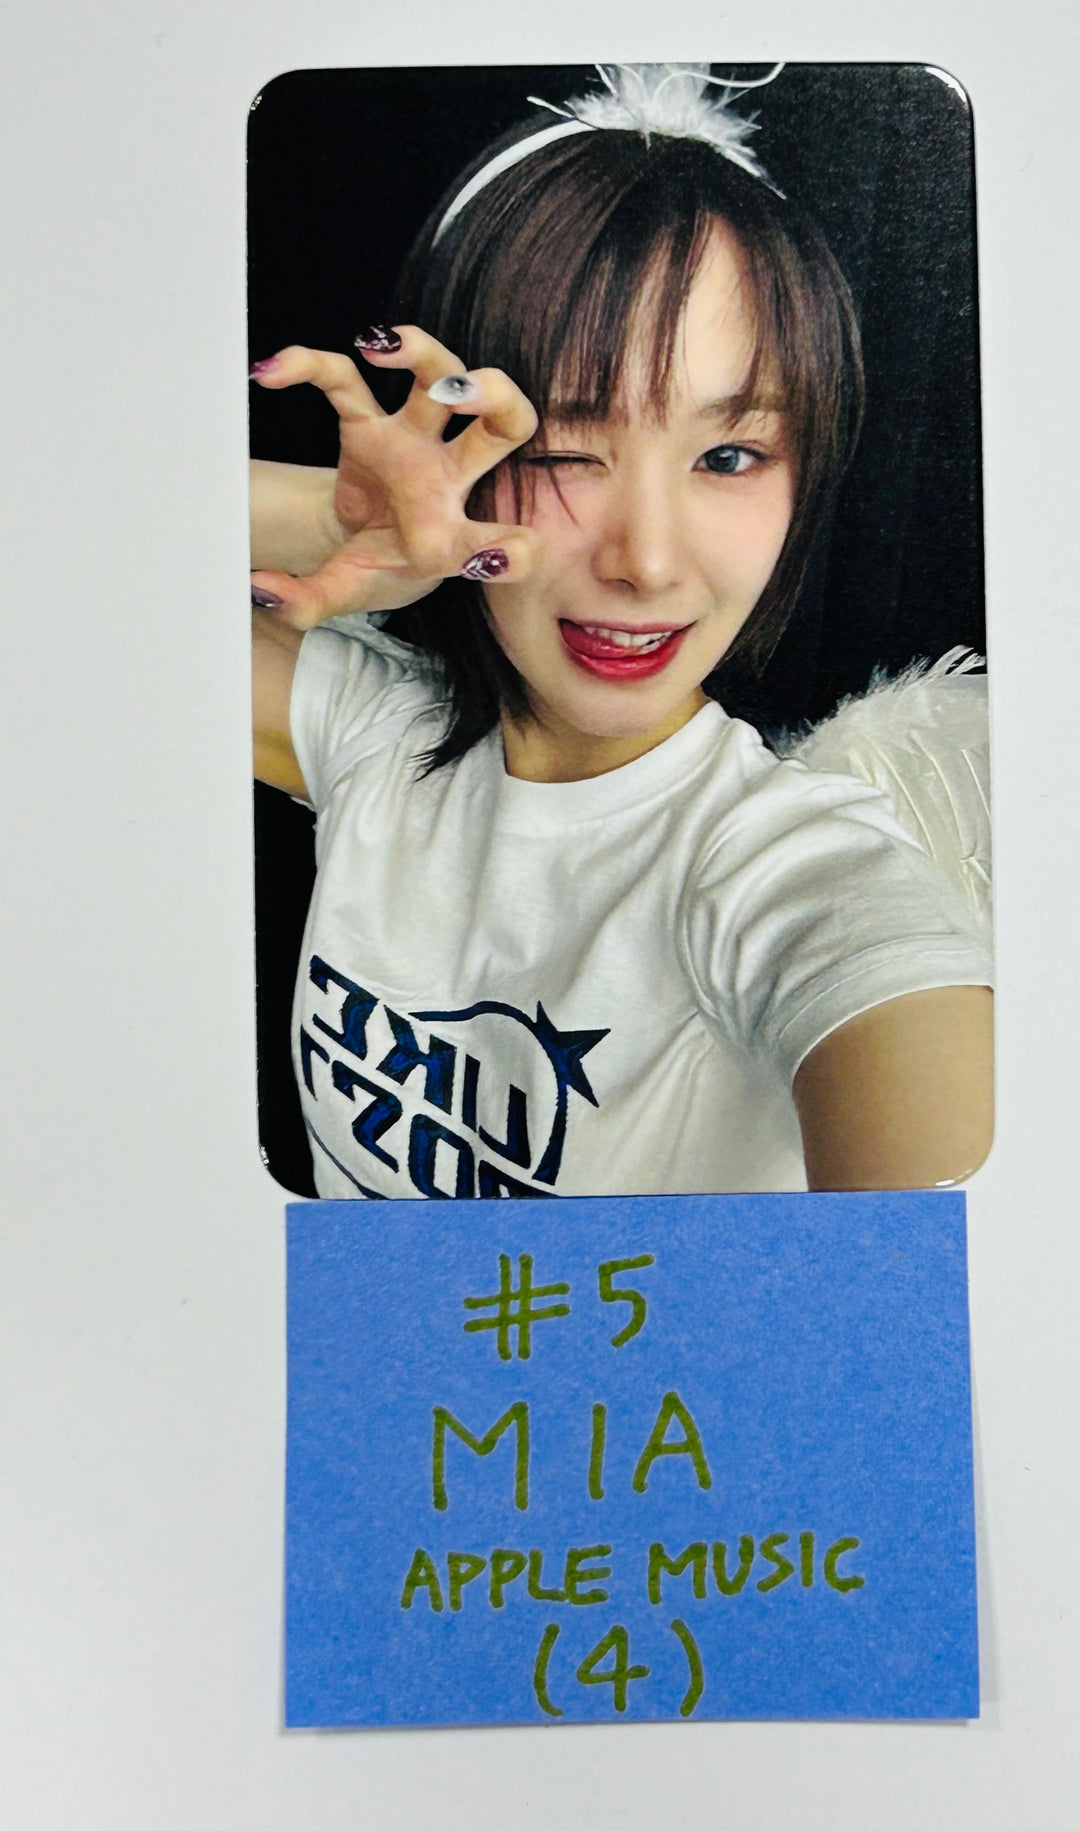 Everglow "ZOMBIE " - Apple Music Lucky Draw Event Photocard [24.6.13]